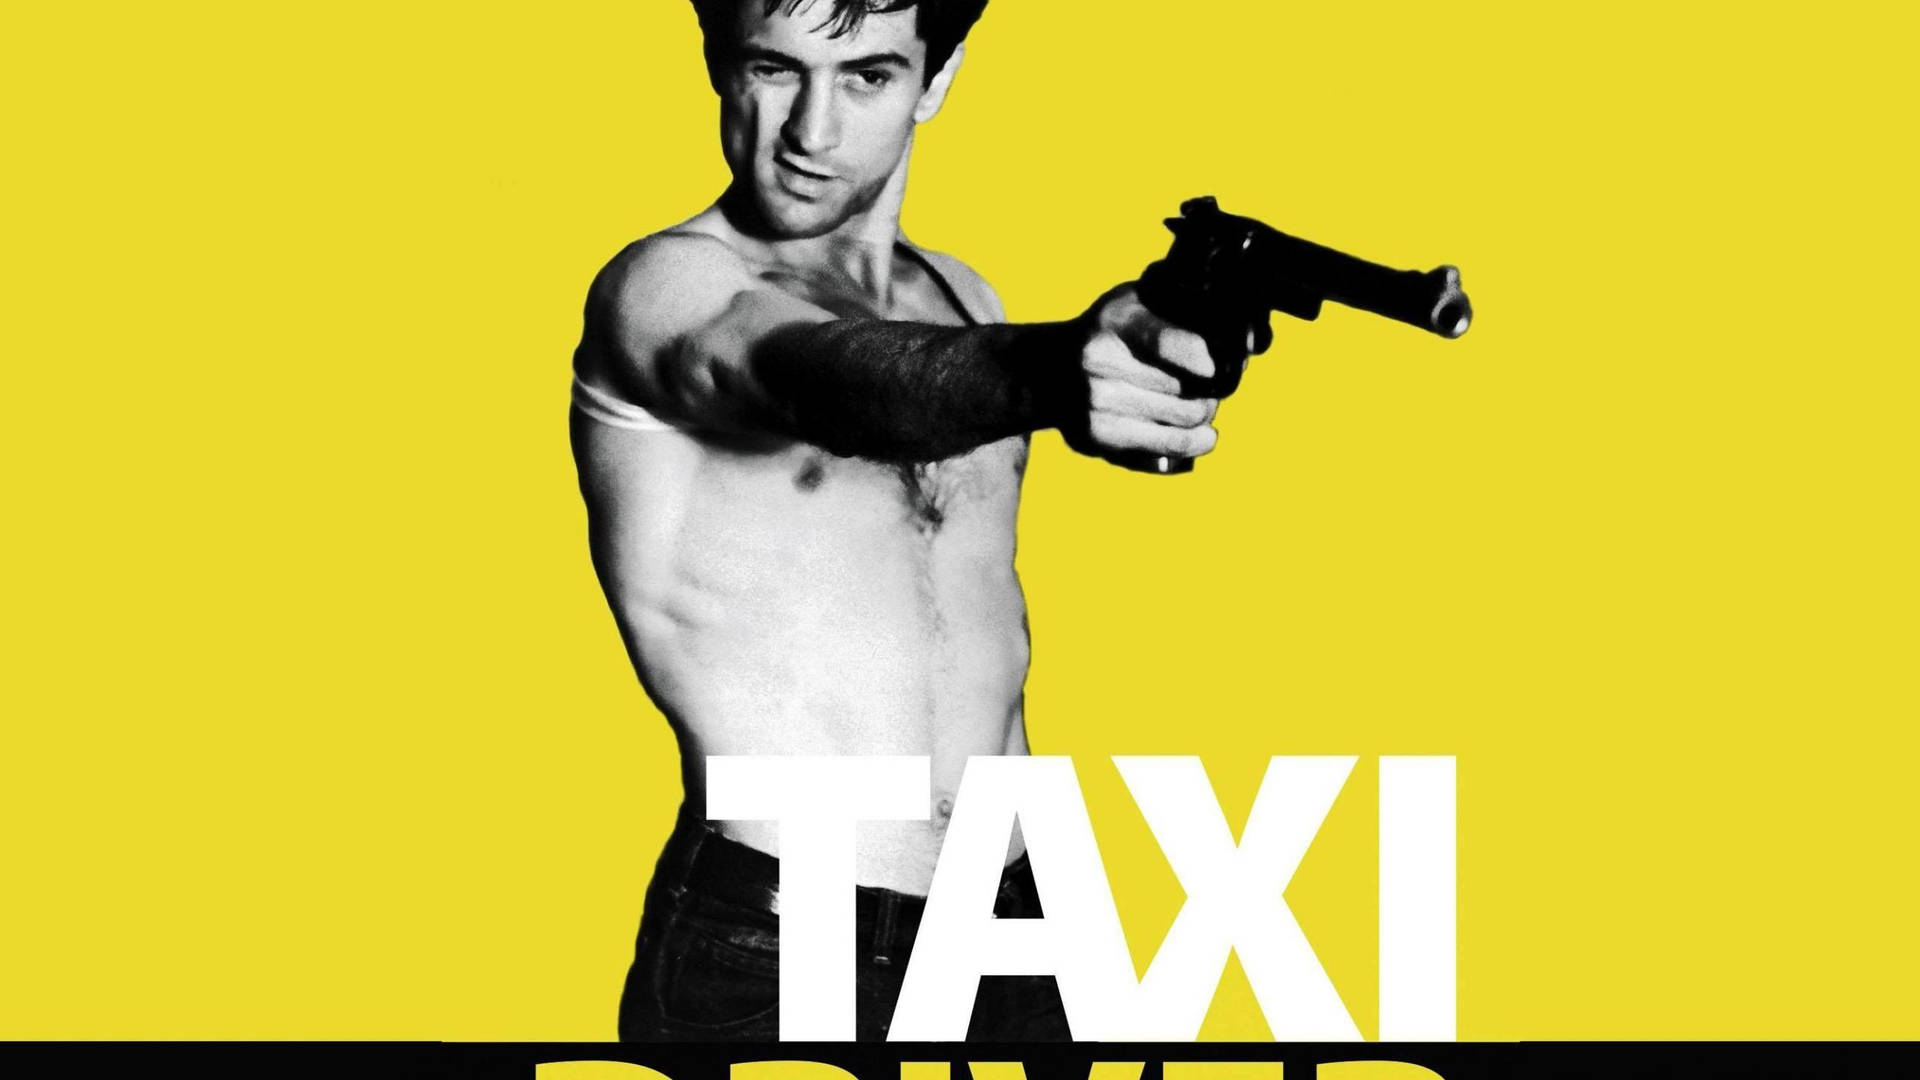 Taxi Driver Hollywood Film Photoshop Background